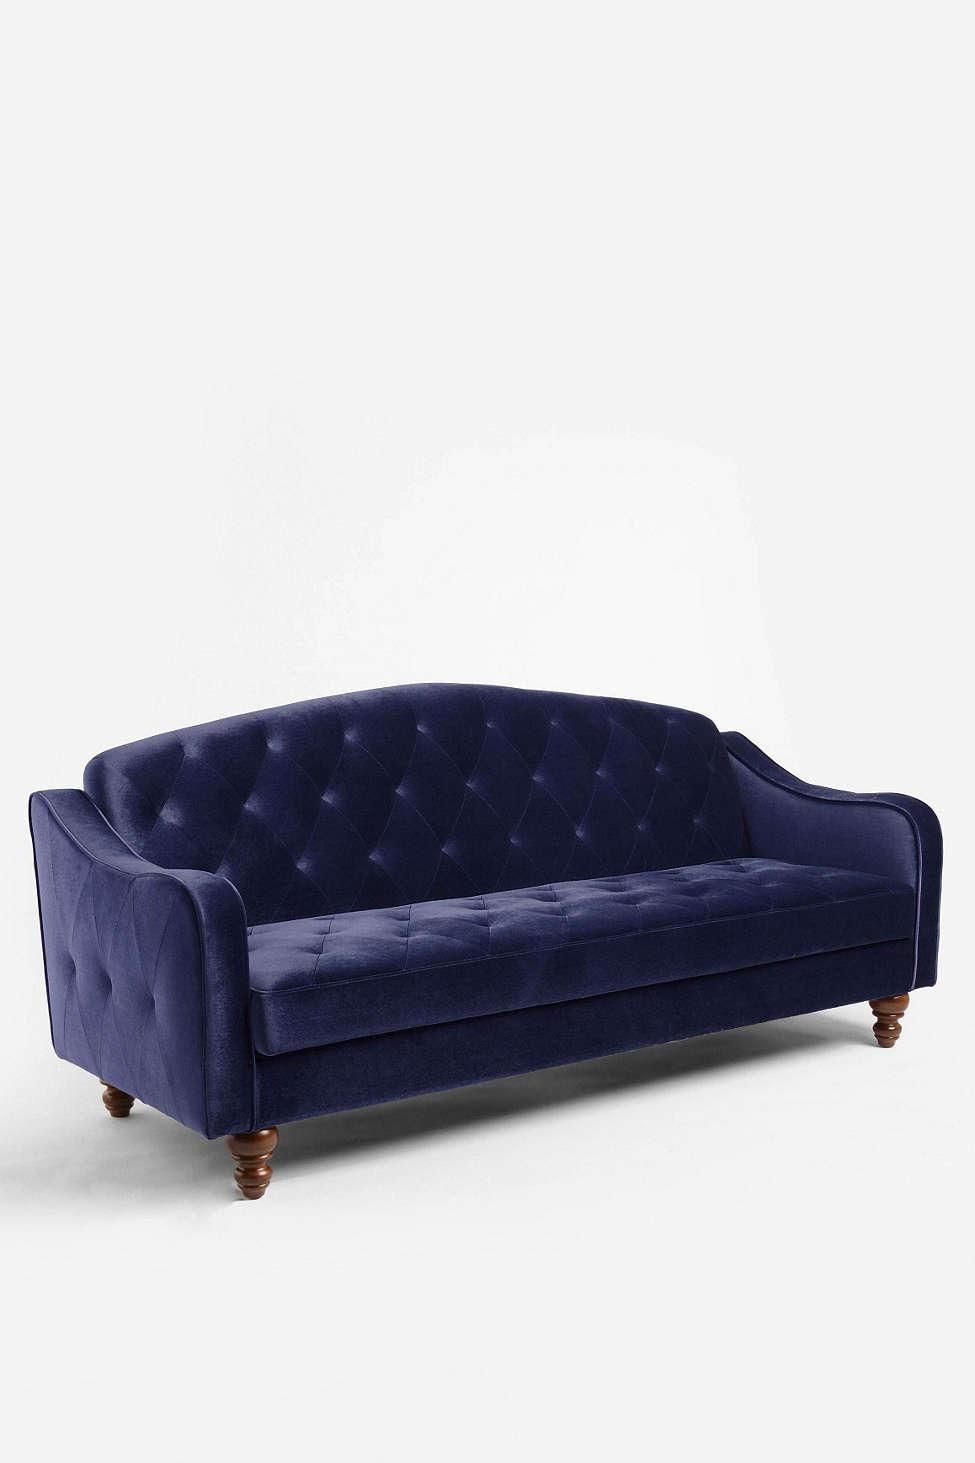 Urban Outfitters Ava Velvet Tufted Sleeper Sofa – Copycatchic Intended For Ava Tufted Sleeper Sofas (View 1 of 20)